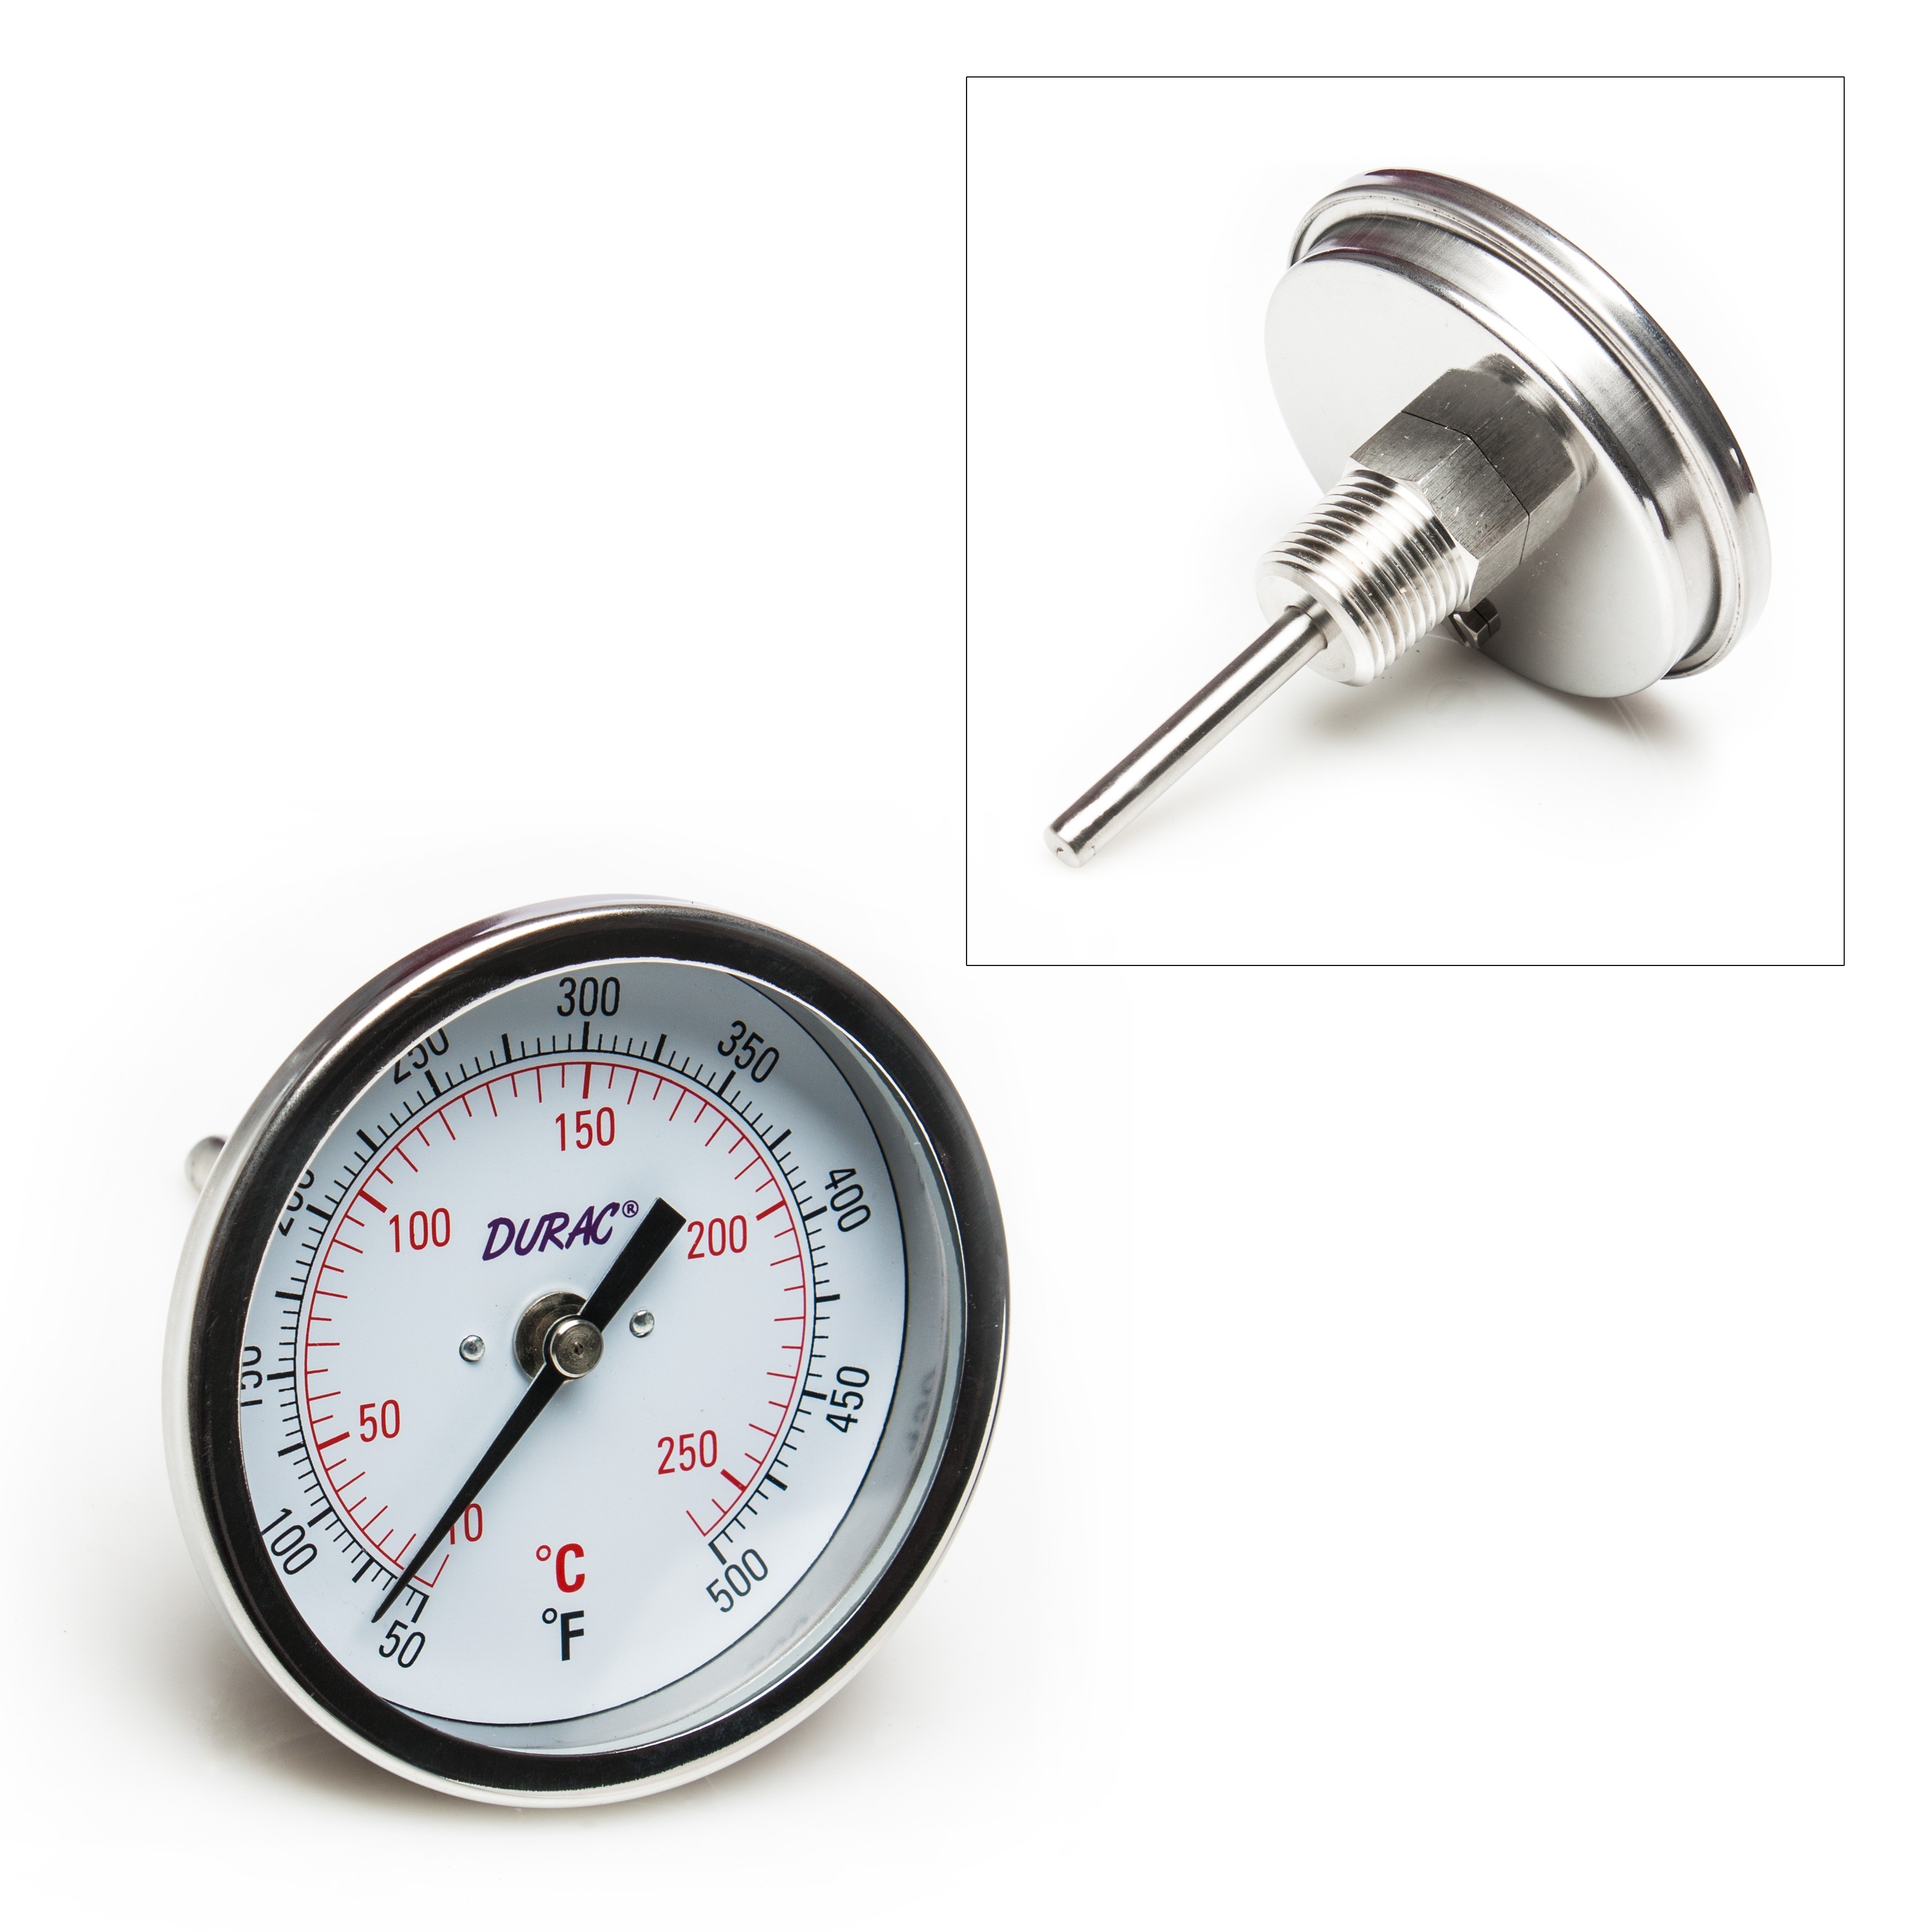 SP Bel-Art, H-B DURAC Bi-Metallic Dial Thermometer; 10 to 260C (50 to 500F), 1/2 in. NPT Threaded Connection, 75mm Dial